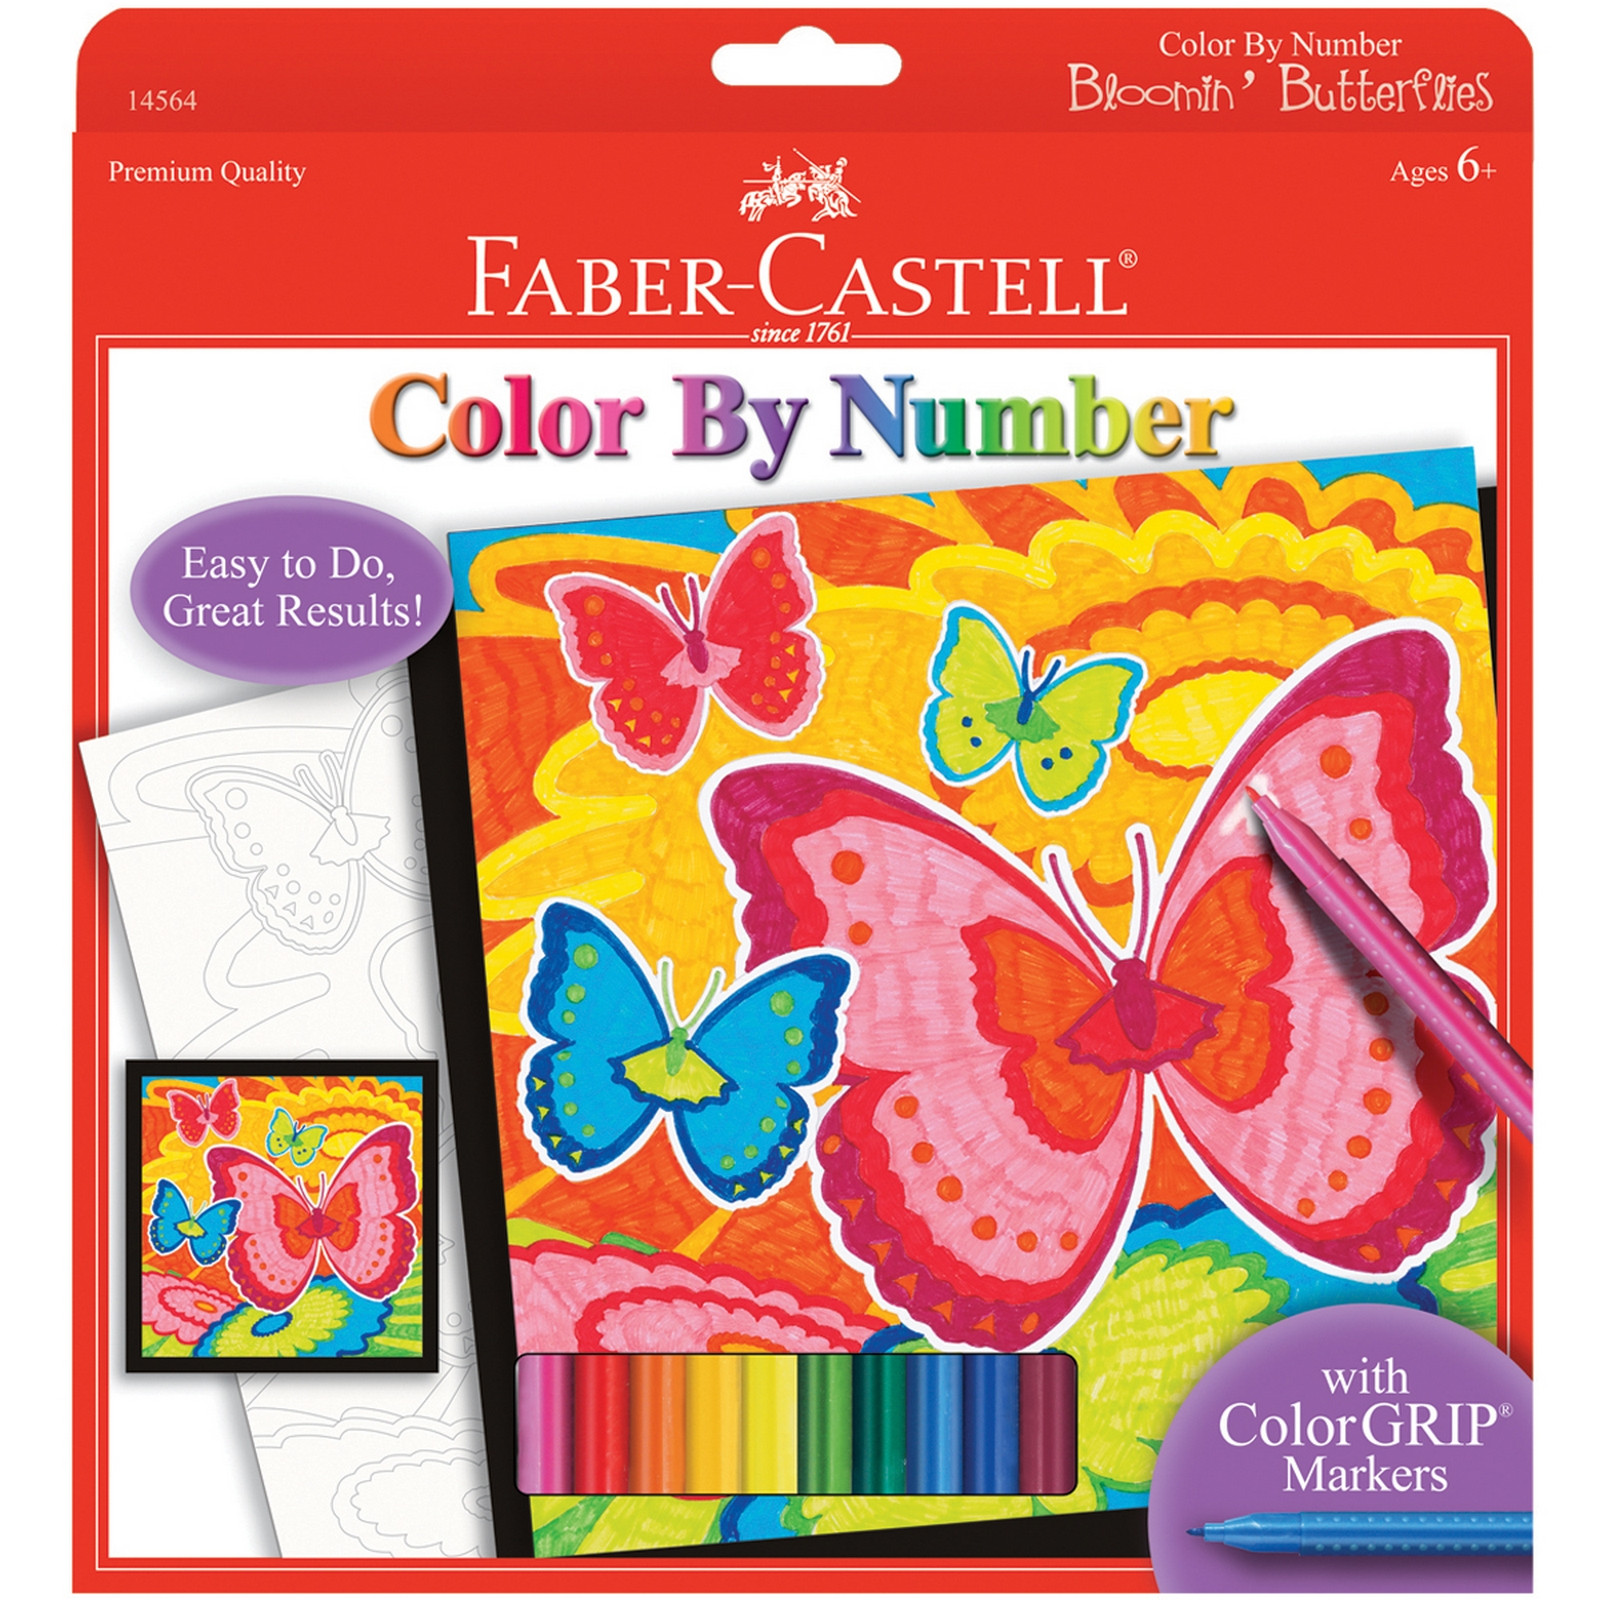 Coloring Kits For Kids
 Creativity for Kids by Faber Castell Color By Number Kit